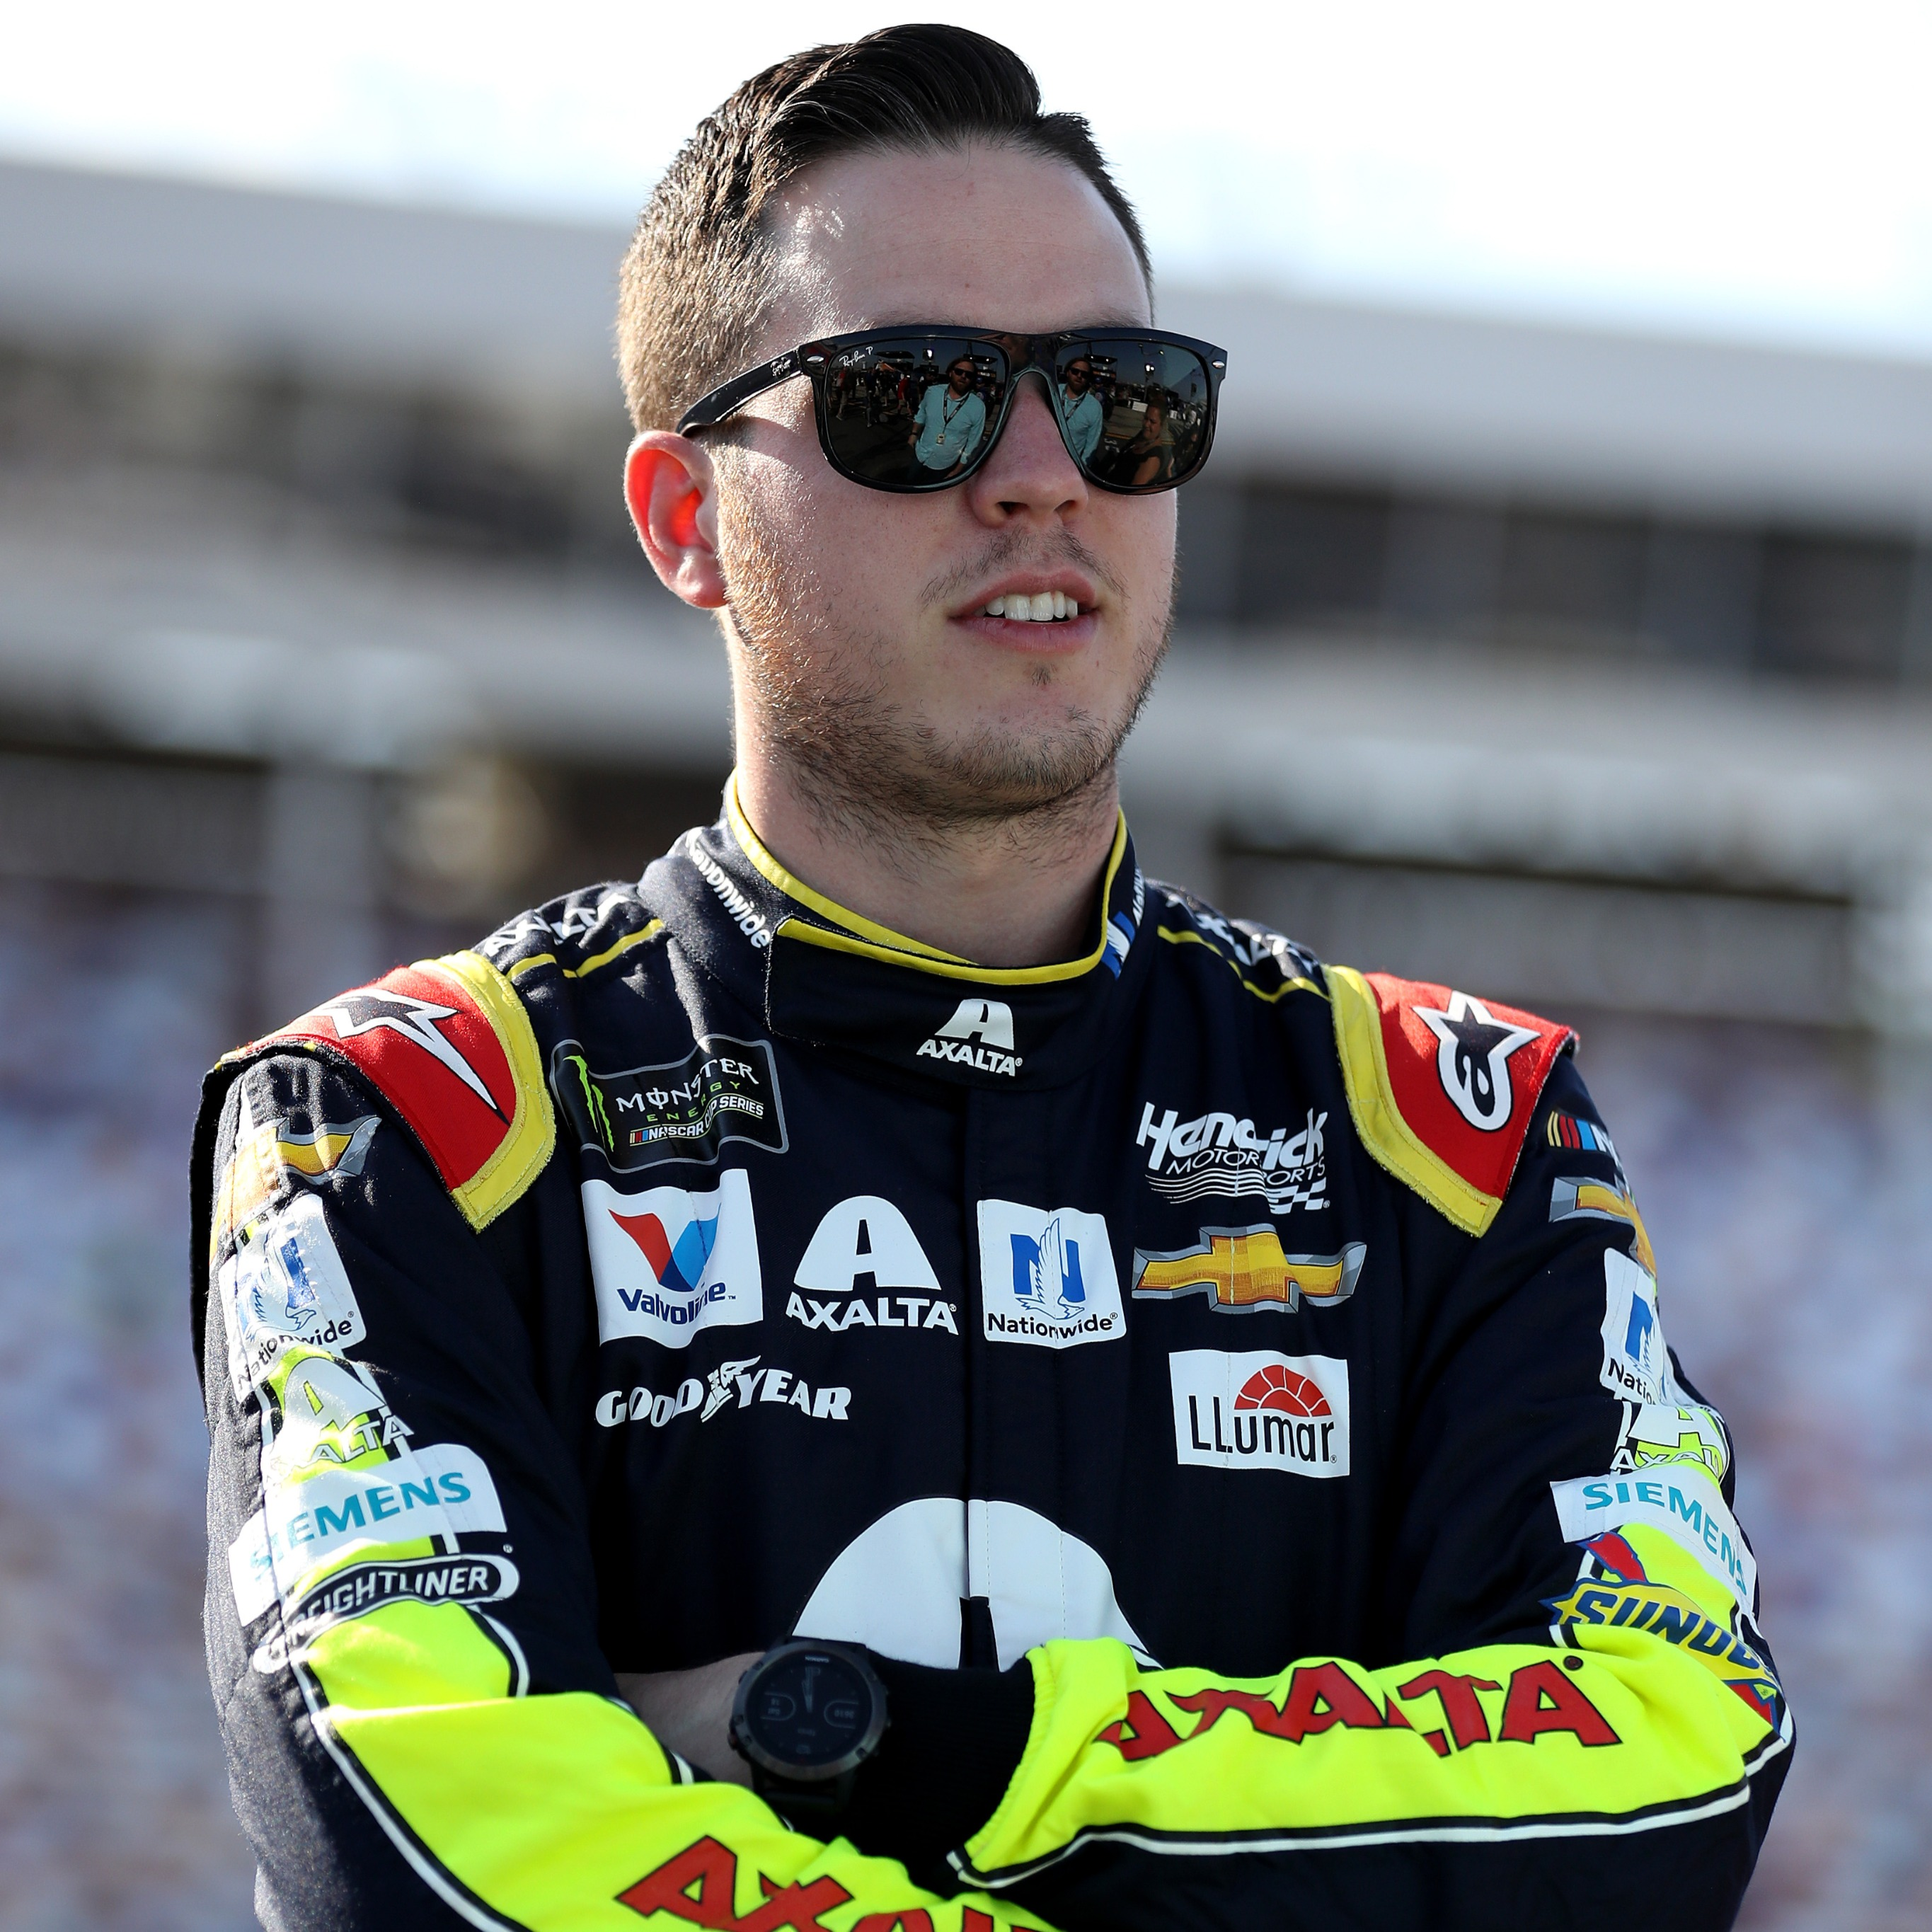 Otto talks NASCAR with driver of the #88 Alex Bowman